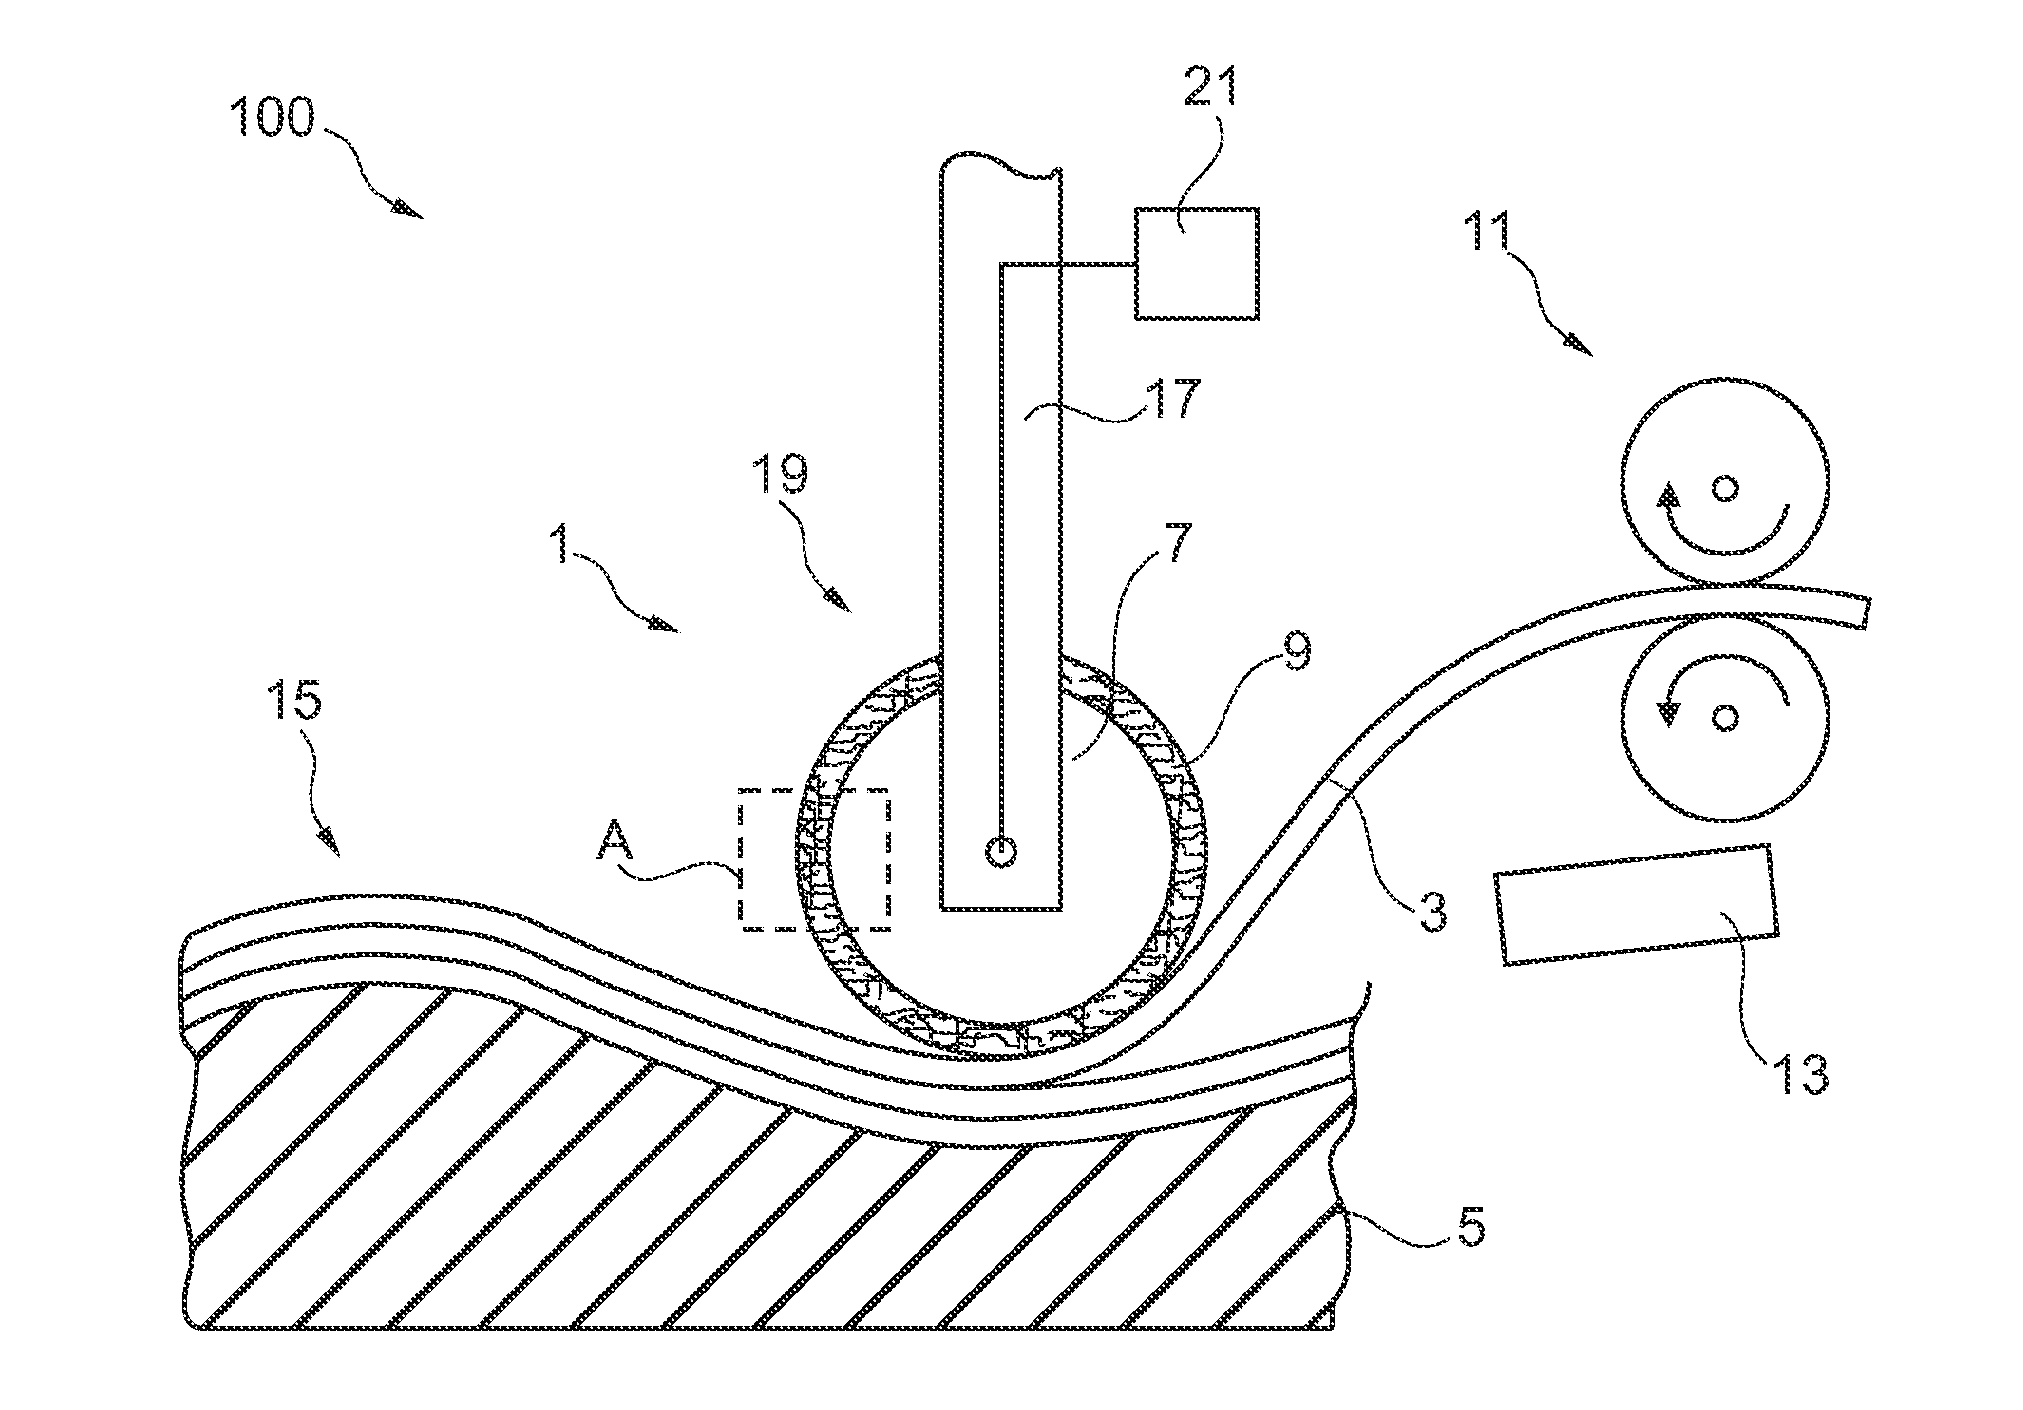 Pressing-on device for pressing on fiber-reinforced thermoplastic materials, fiber arranging device, and method for arranging a fiber-reinforced thermoplastic material